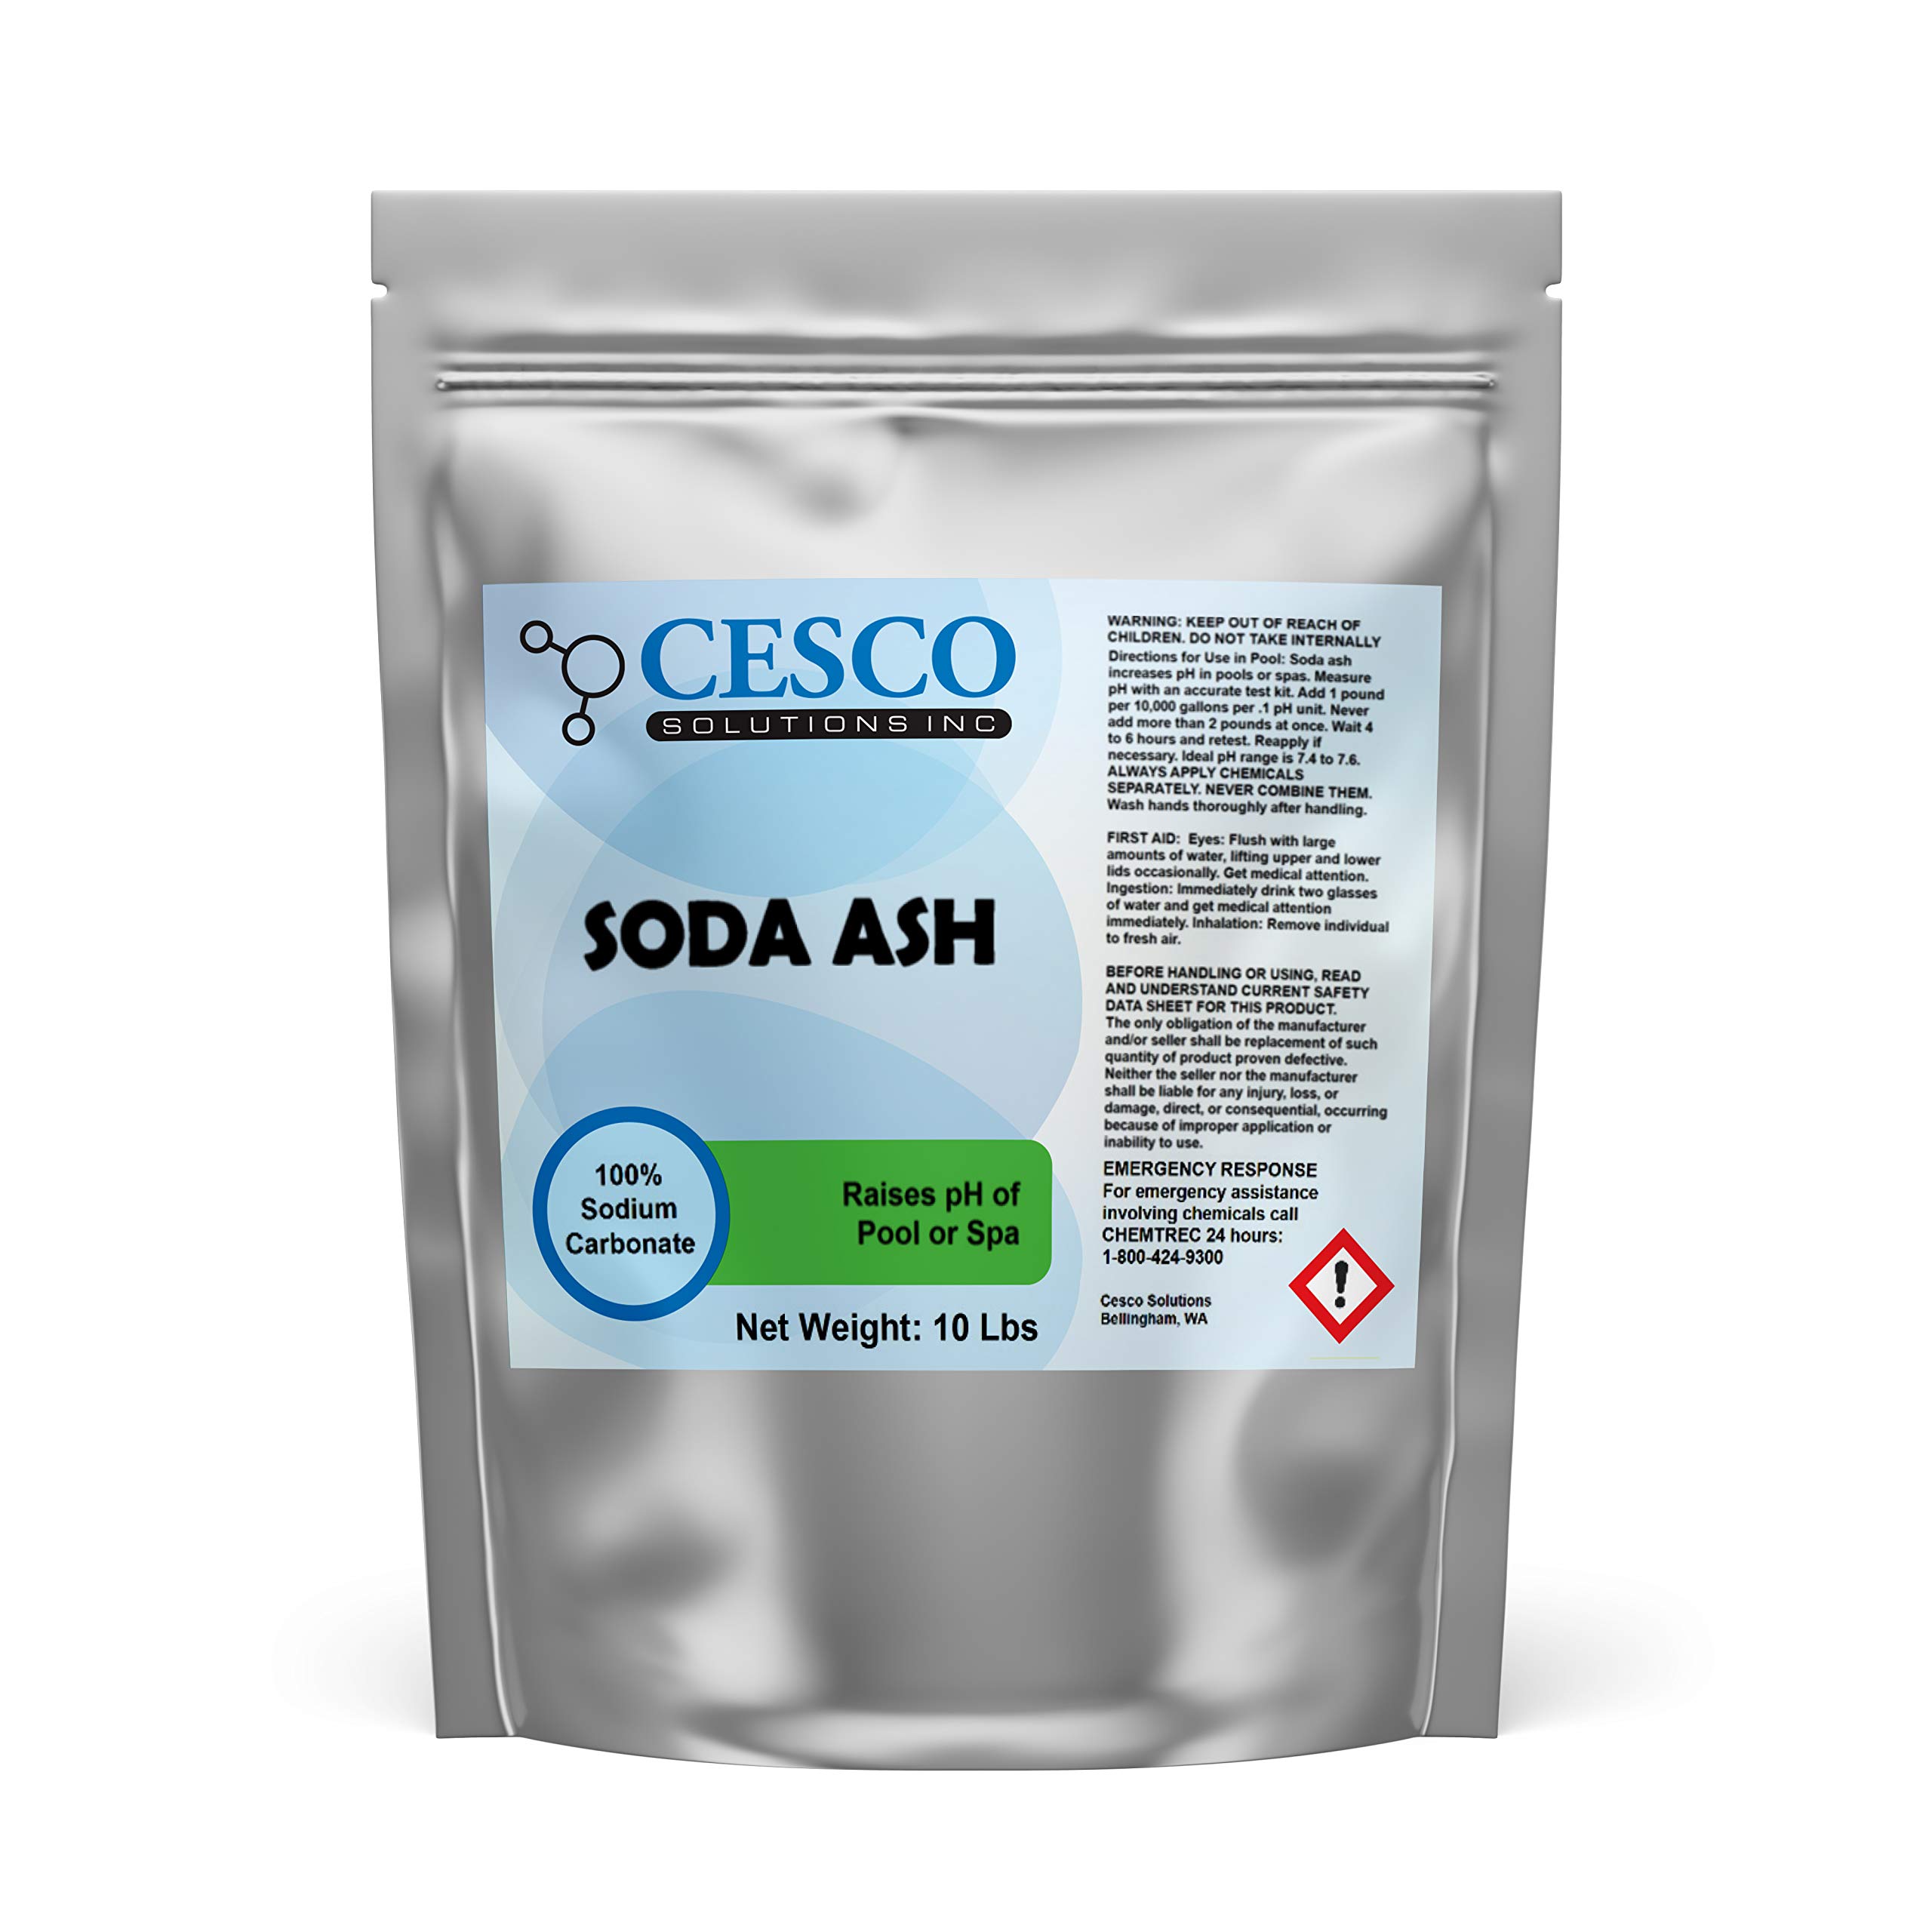 Cesco Solutions, Inc Soda Ash 10 Lbs - Tie Dye - Stain Remover - Increase Pool pH Levels - Prevents Itching - Raises Alkalinity - Laundry Boo